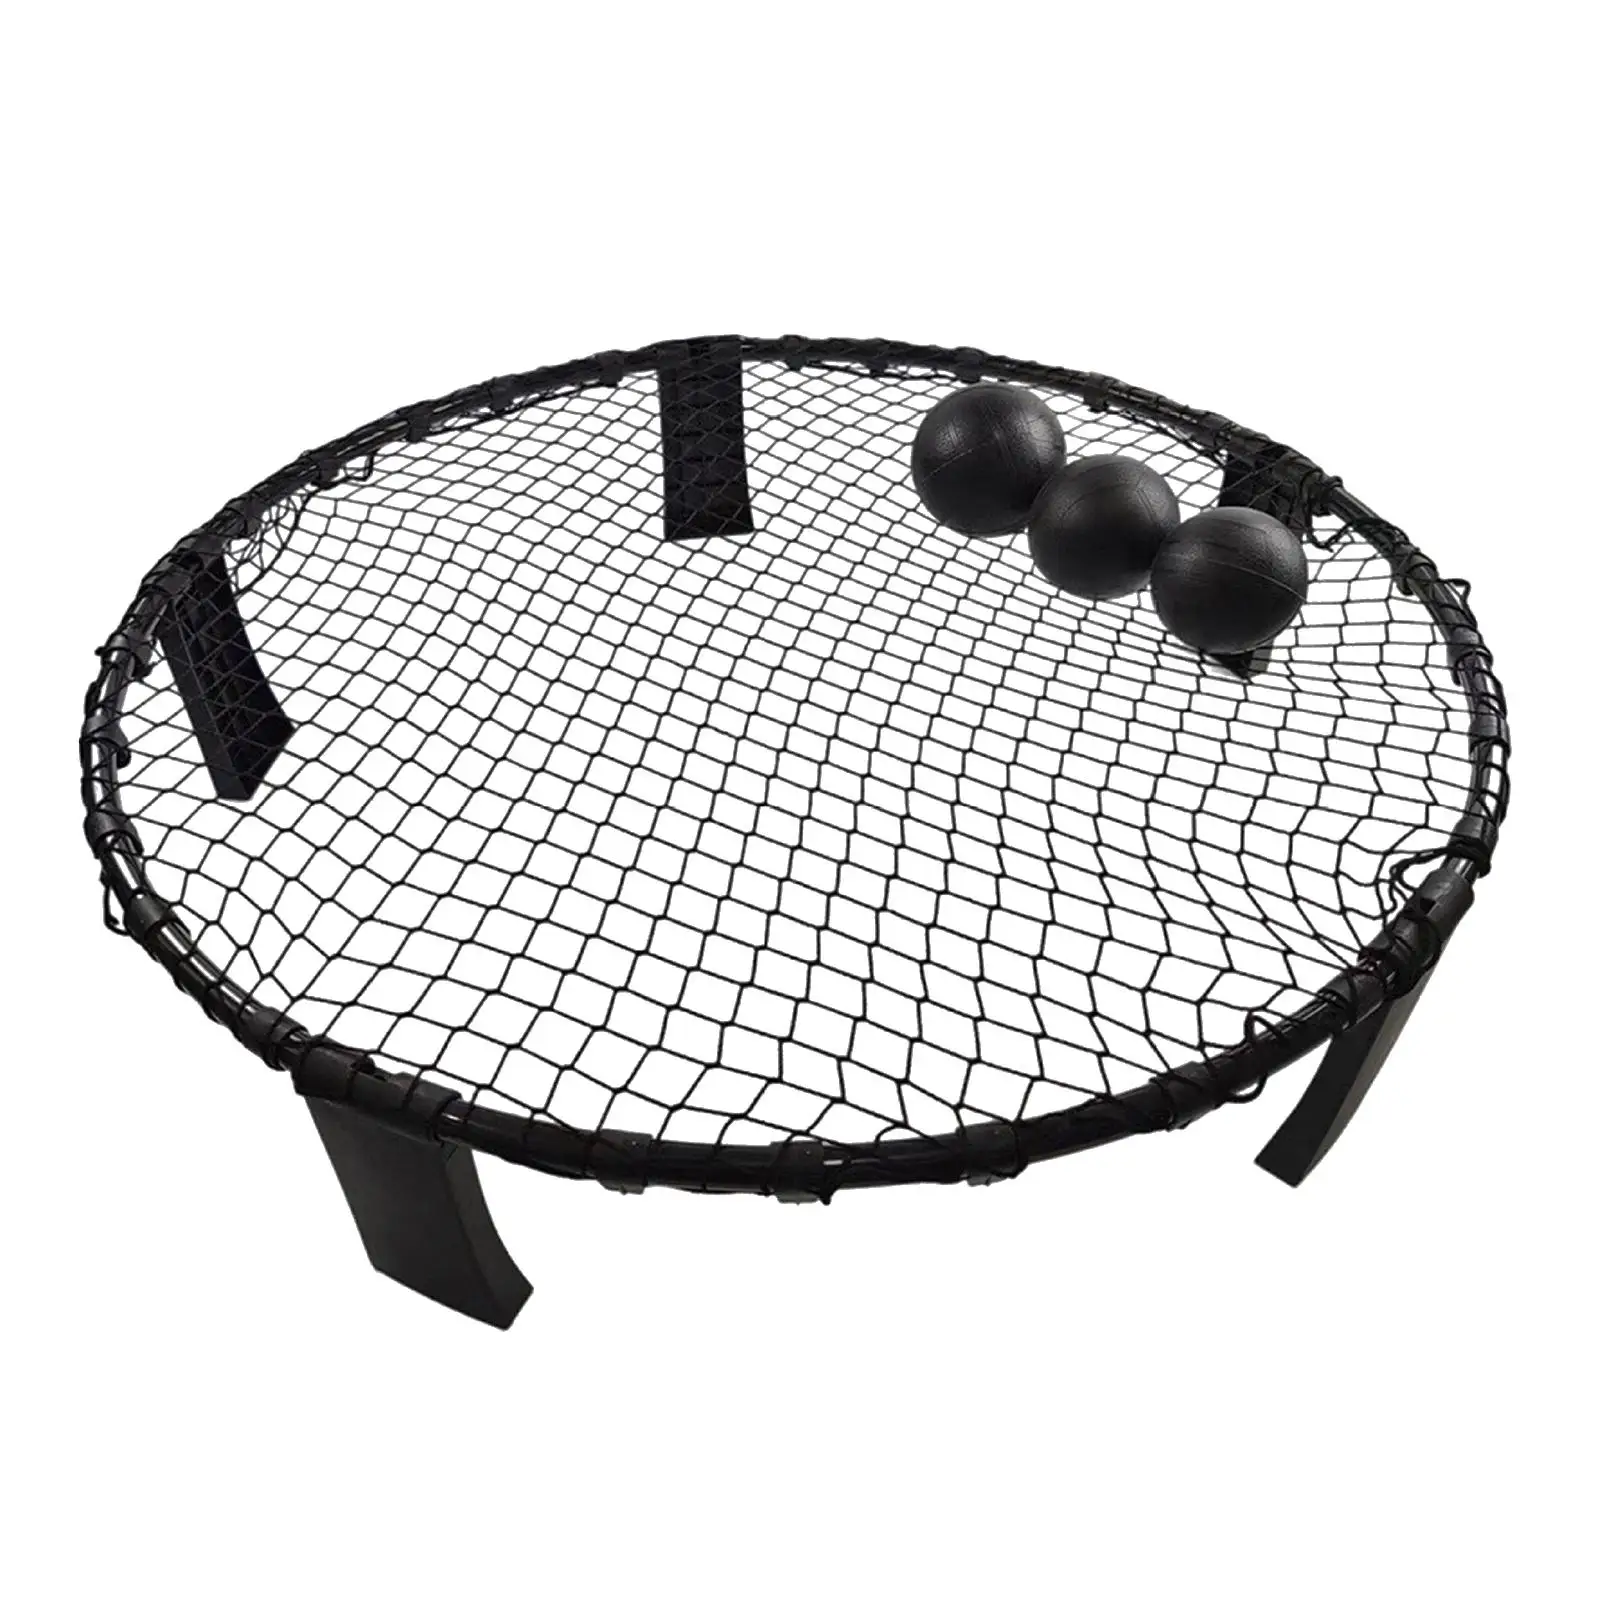 

Beach Spike Game Set Outdoor Team Sports with 3 Balls Volleyball Net for Adults Family Summer Yard Lawn Fitness Equipment